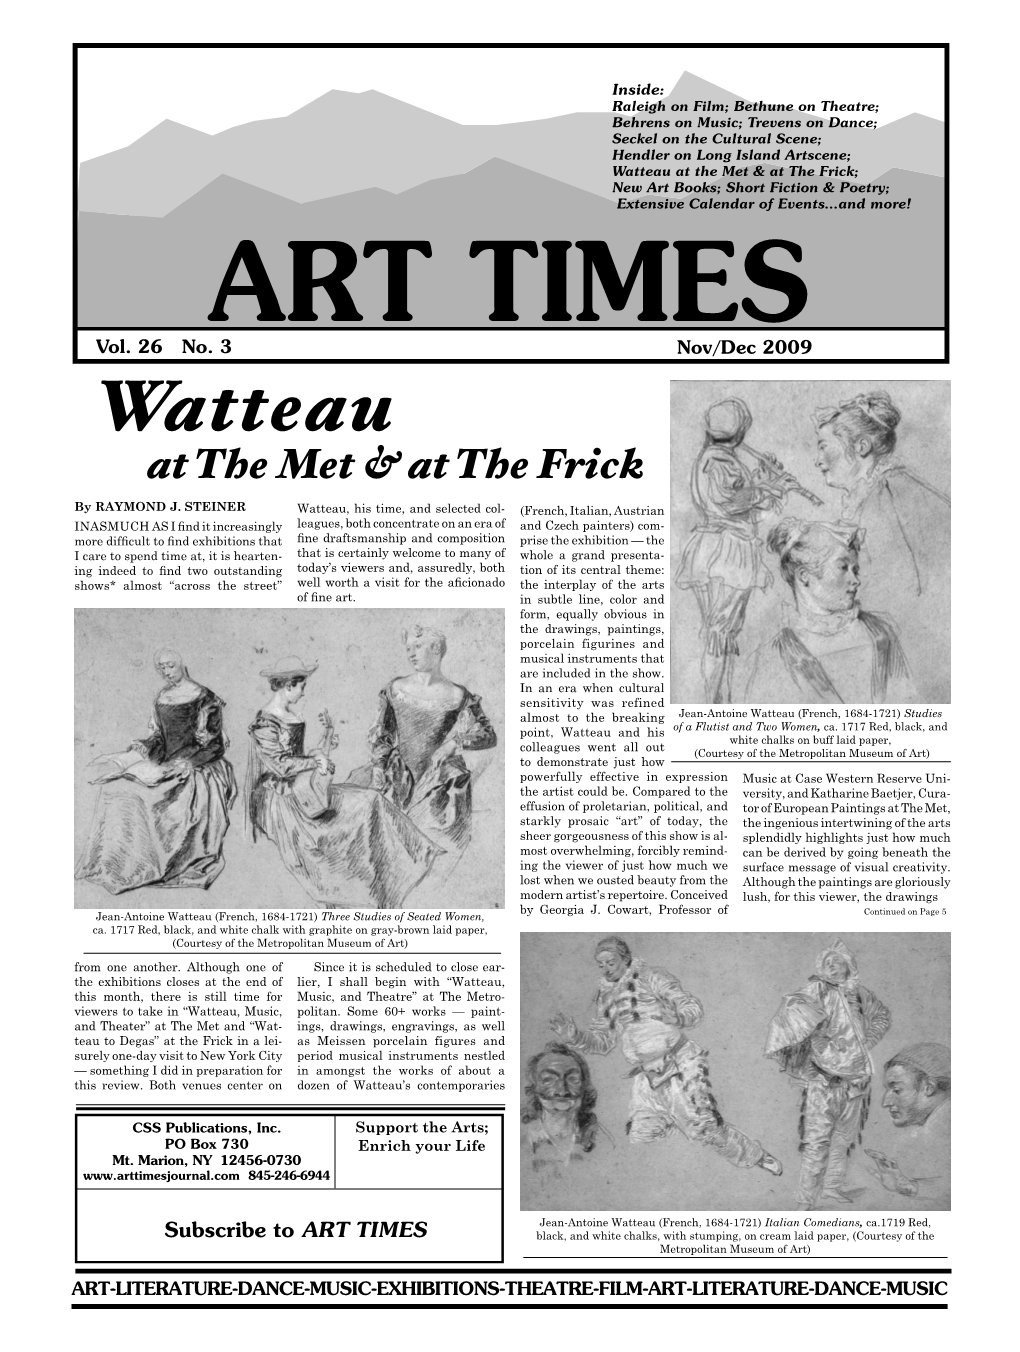 Watteau at the Met & at the Frick; New Art Books; Short Fiction & Poetry; Extensive Calendar of Events…And More! ART TIMES Vol